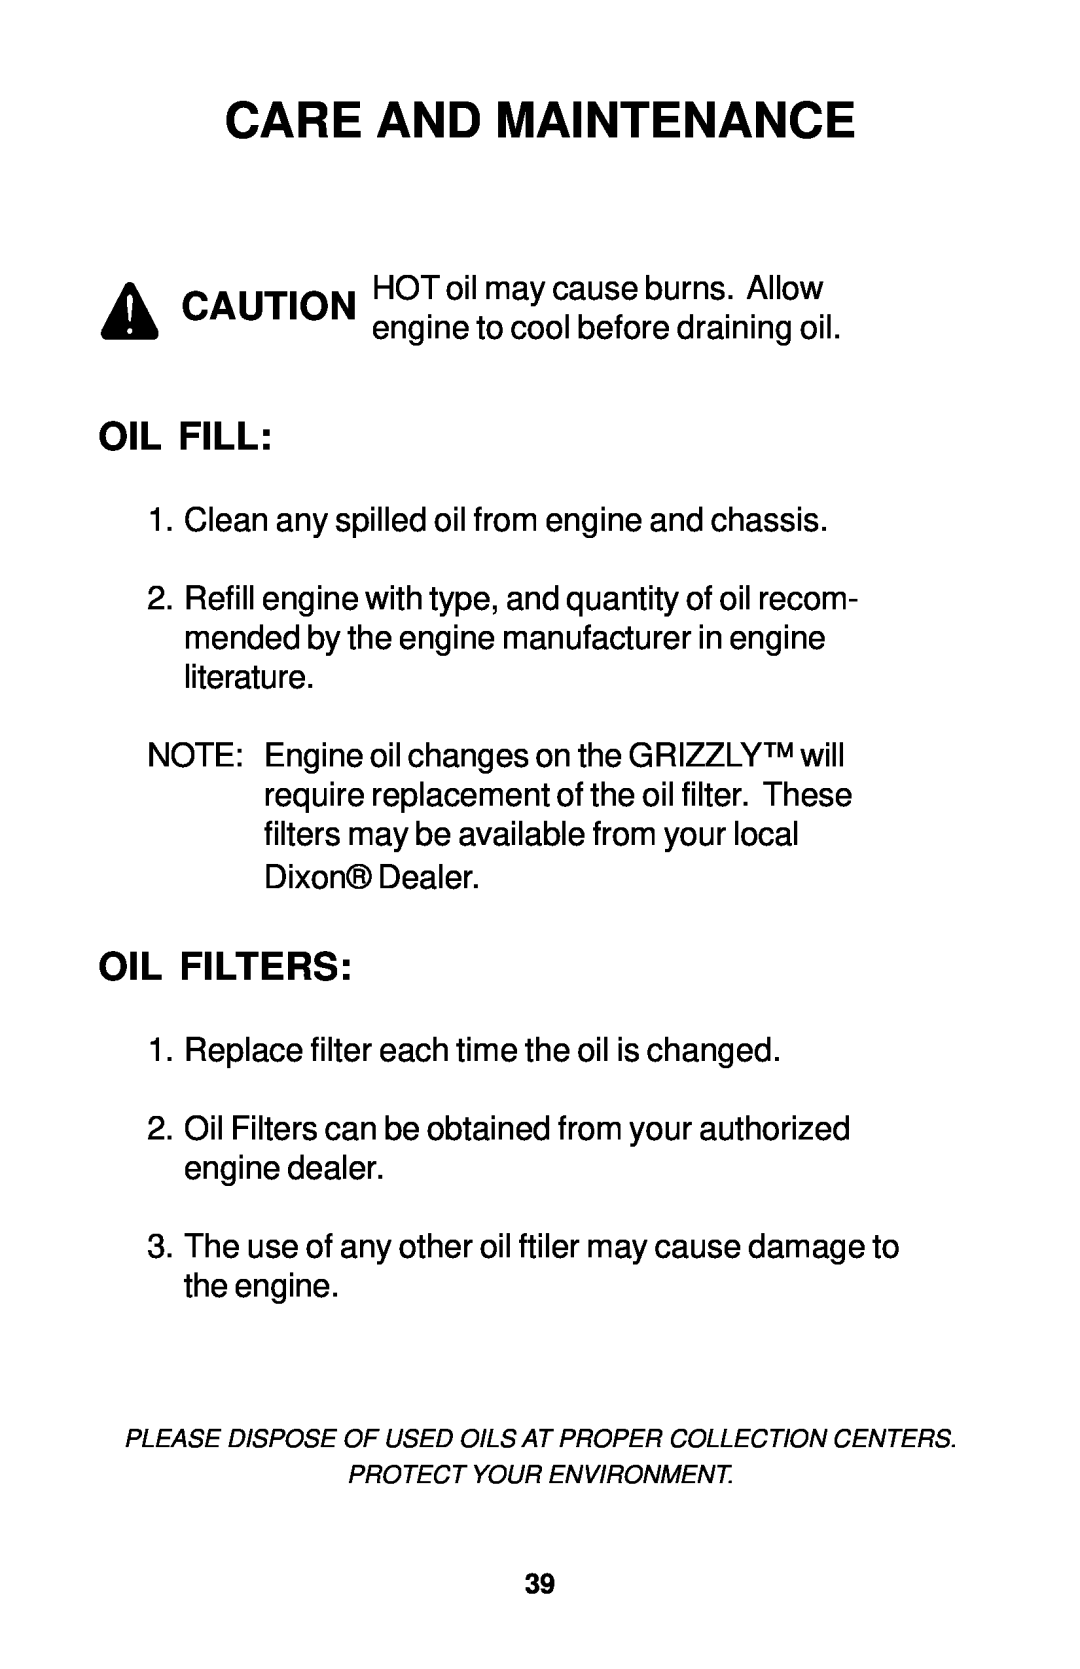 Dixon 18134-1004 manual Oil Fill, Oil Filters, Care And Maintenance 